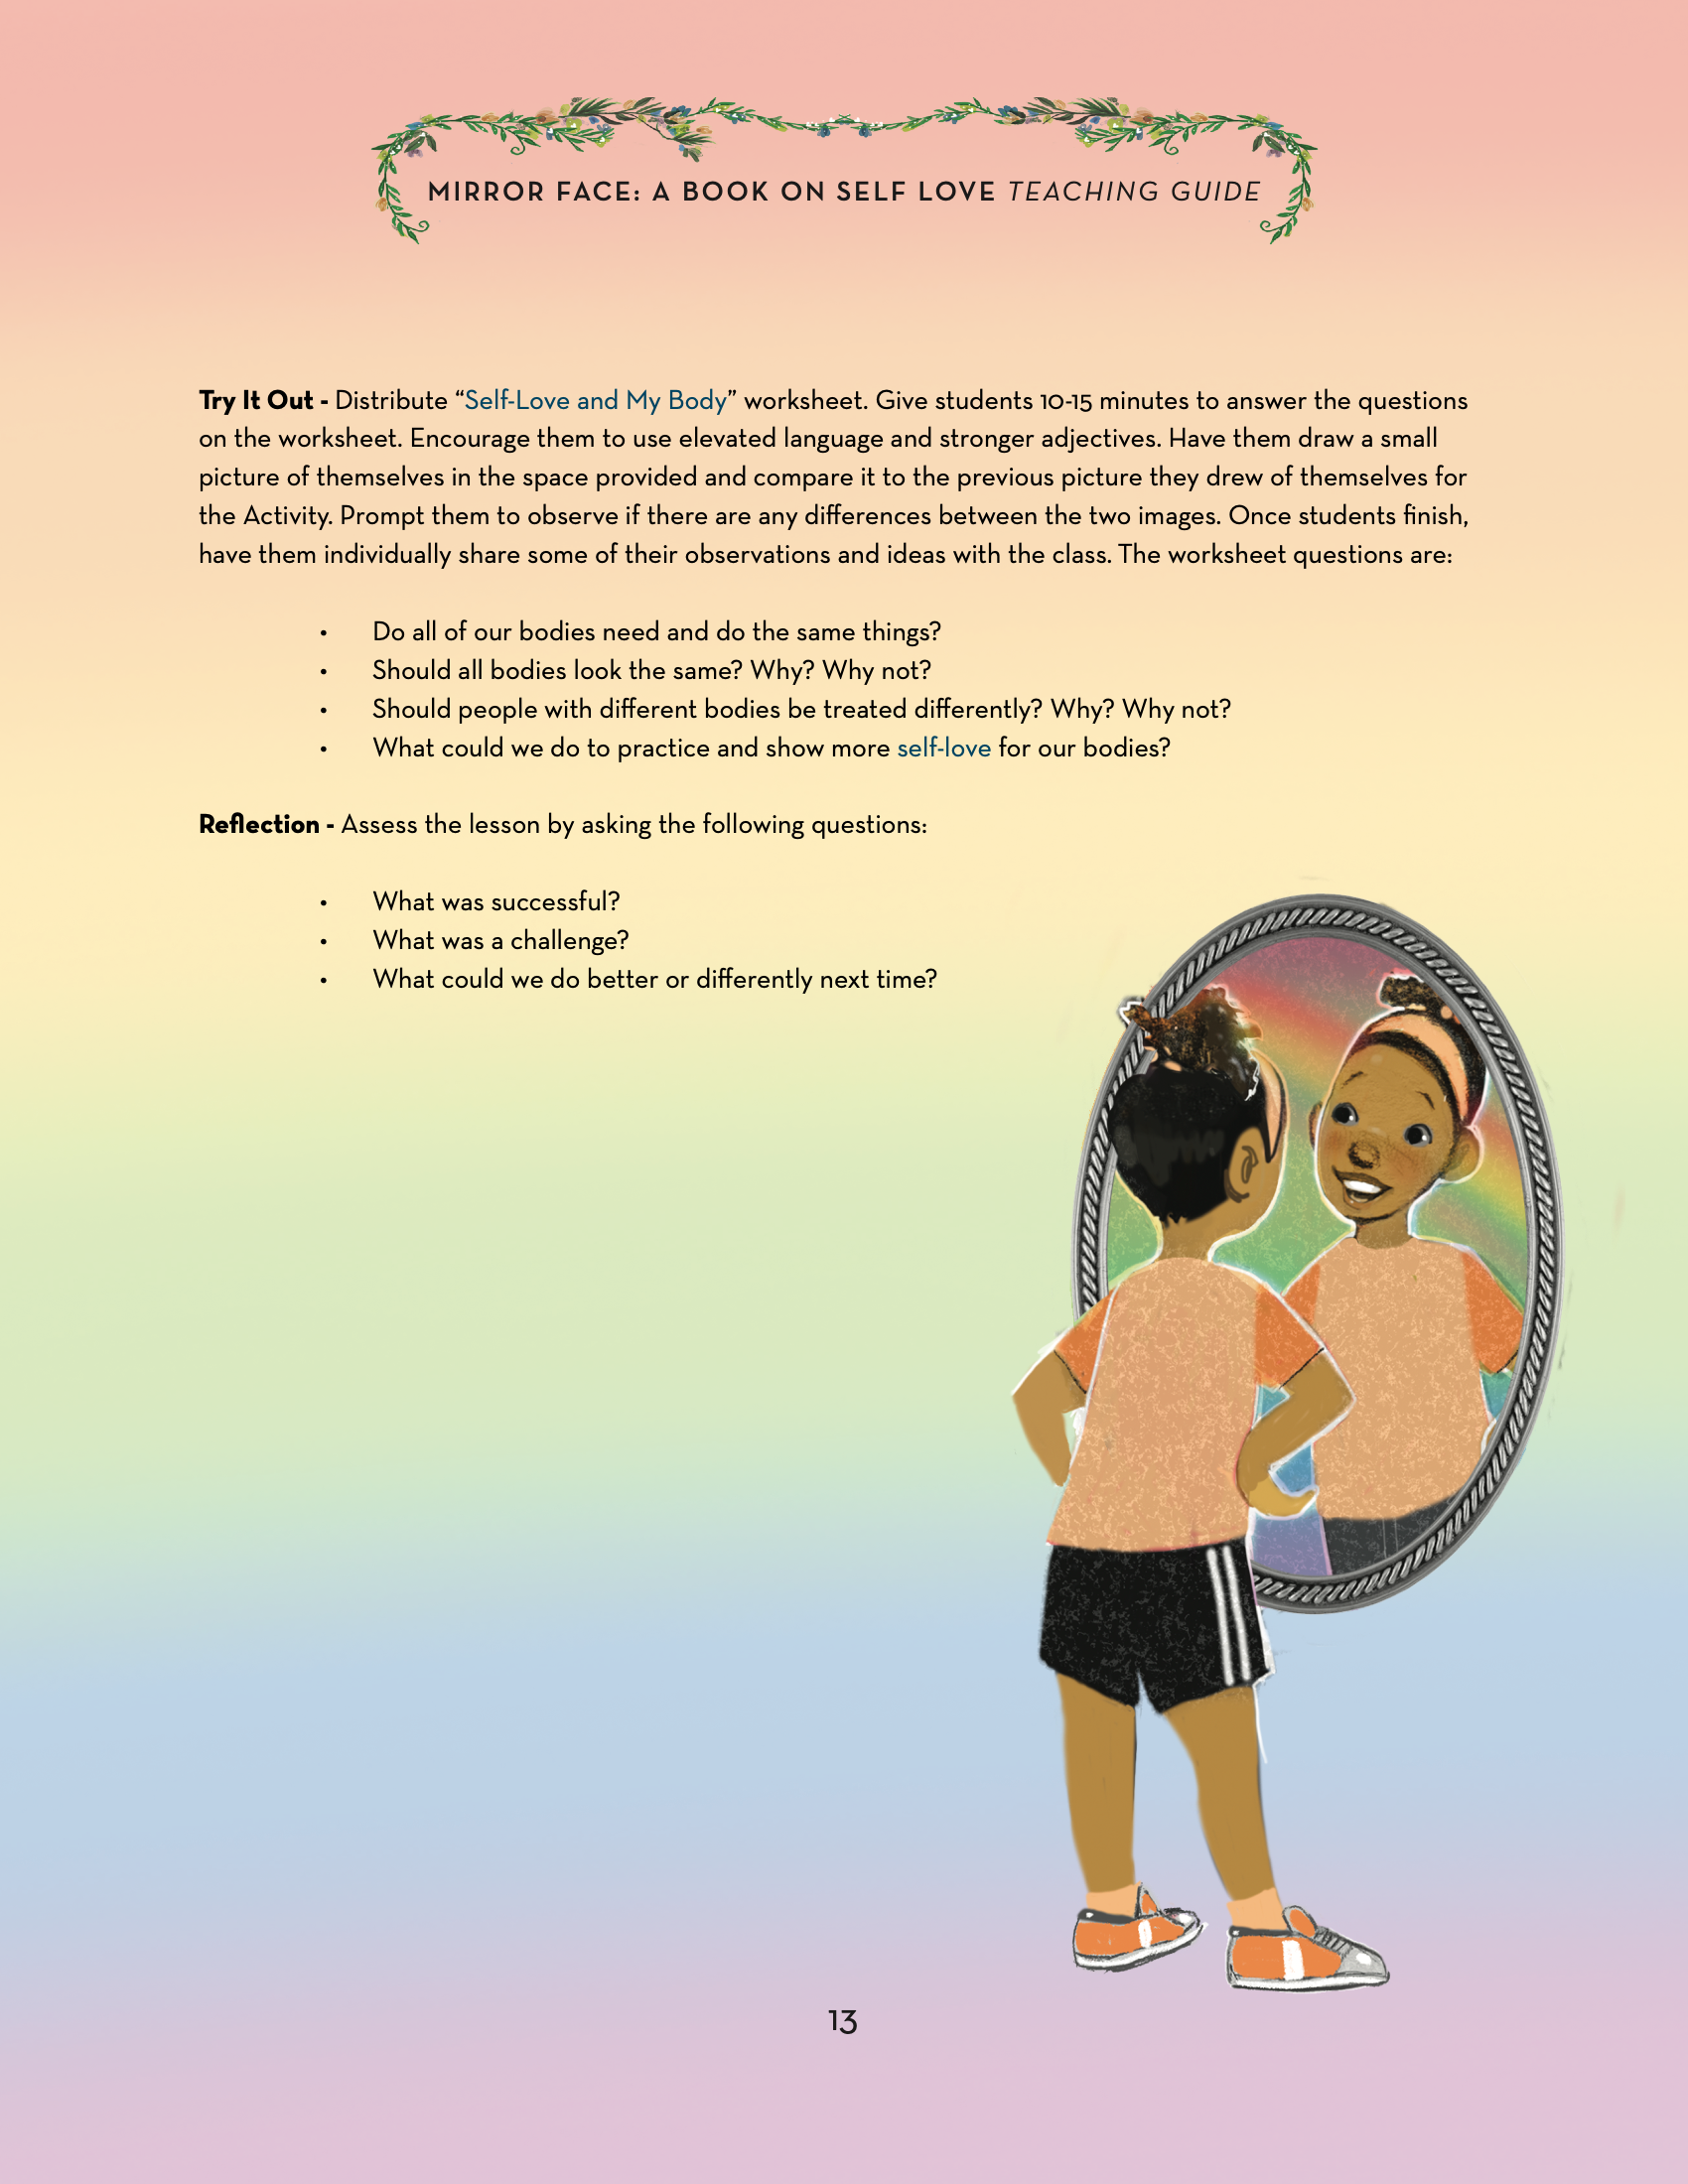 Mirror Face Teaching Guide_7_27_22 13-13.png